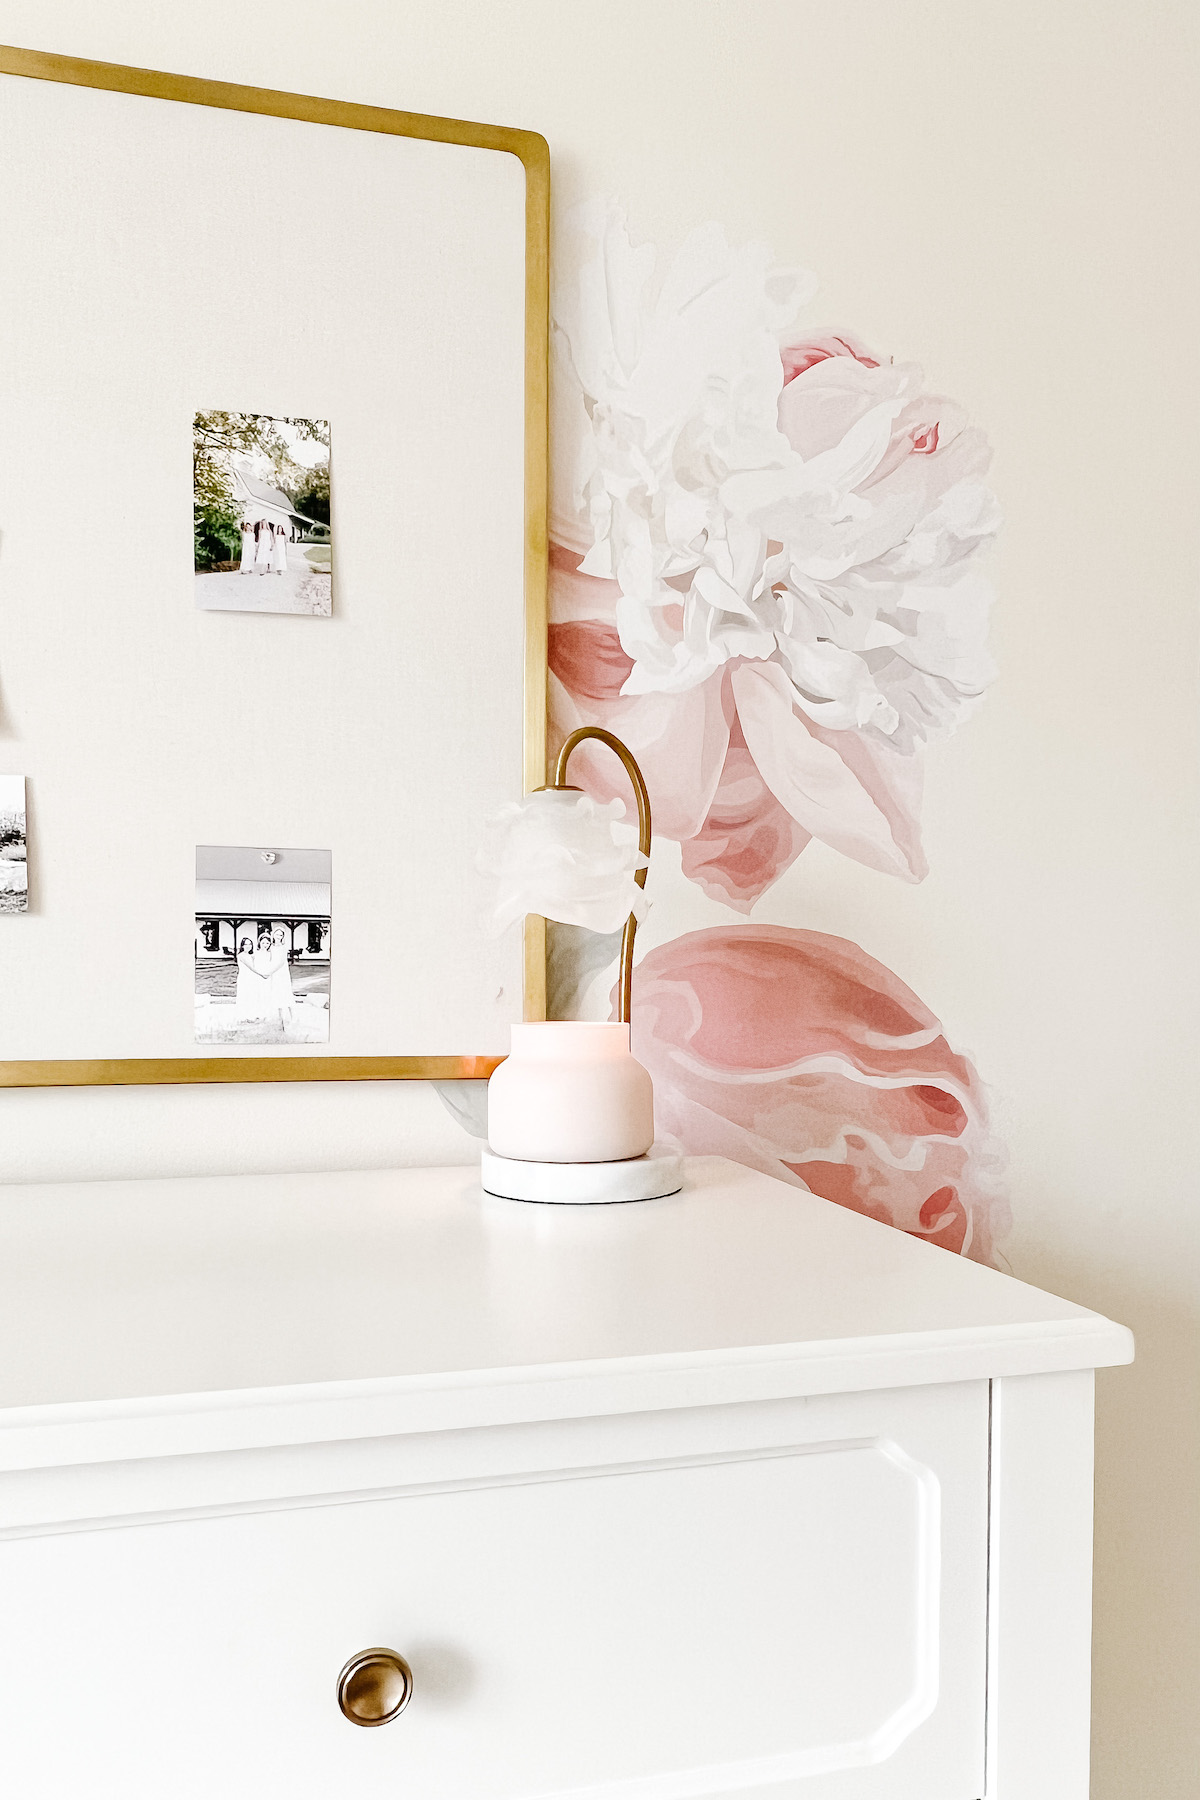 A white dresser in a pink and gold tween bedroom.